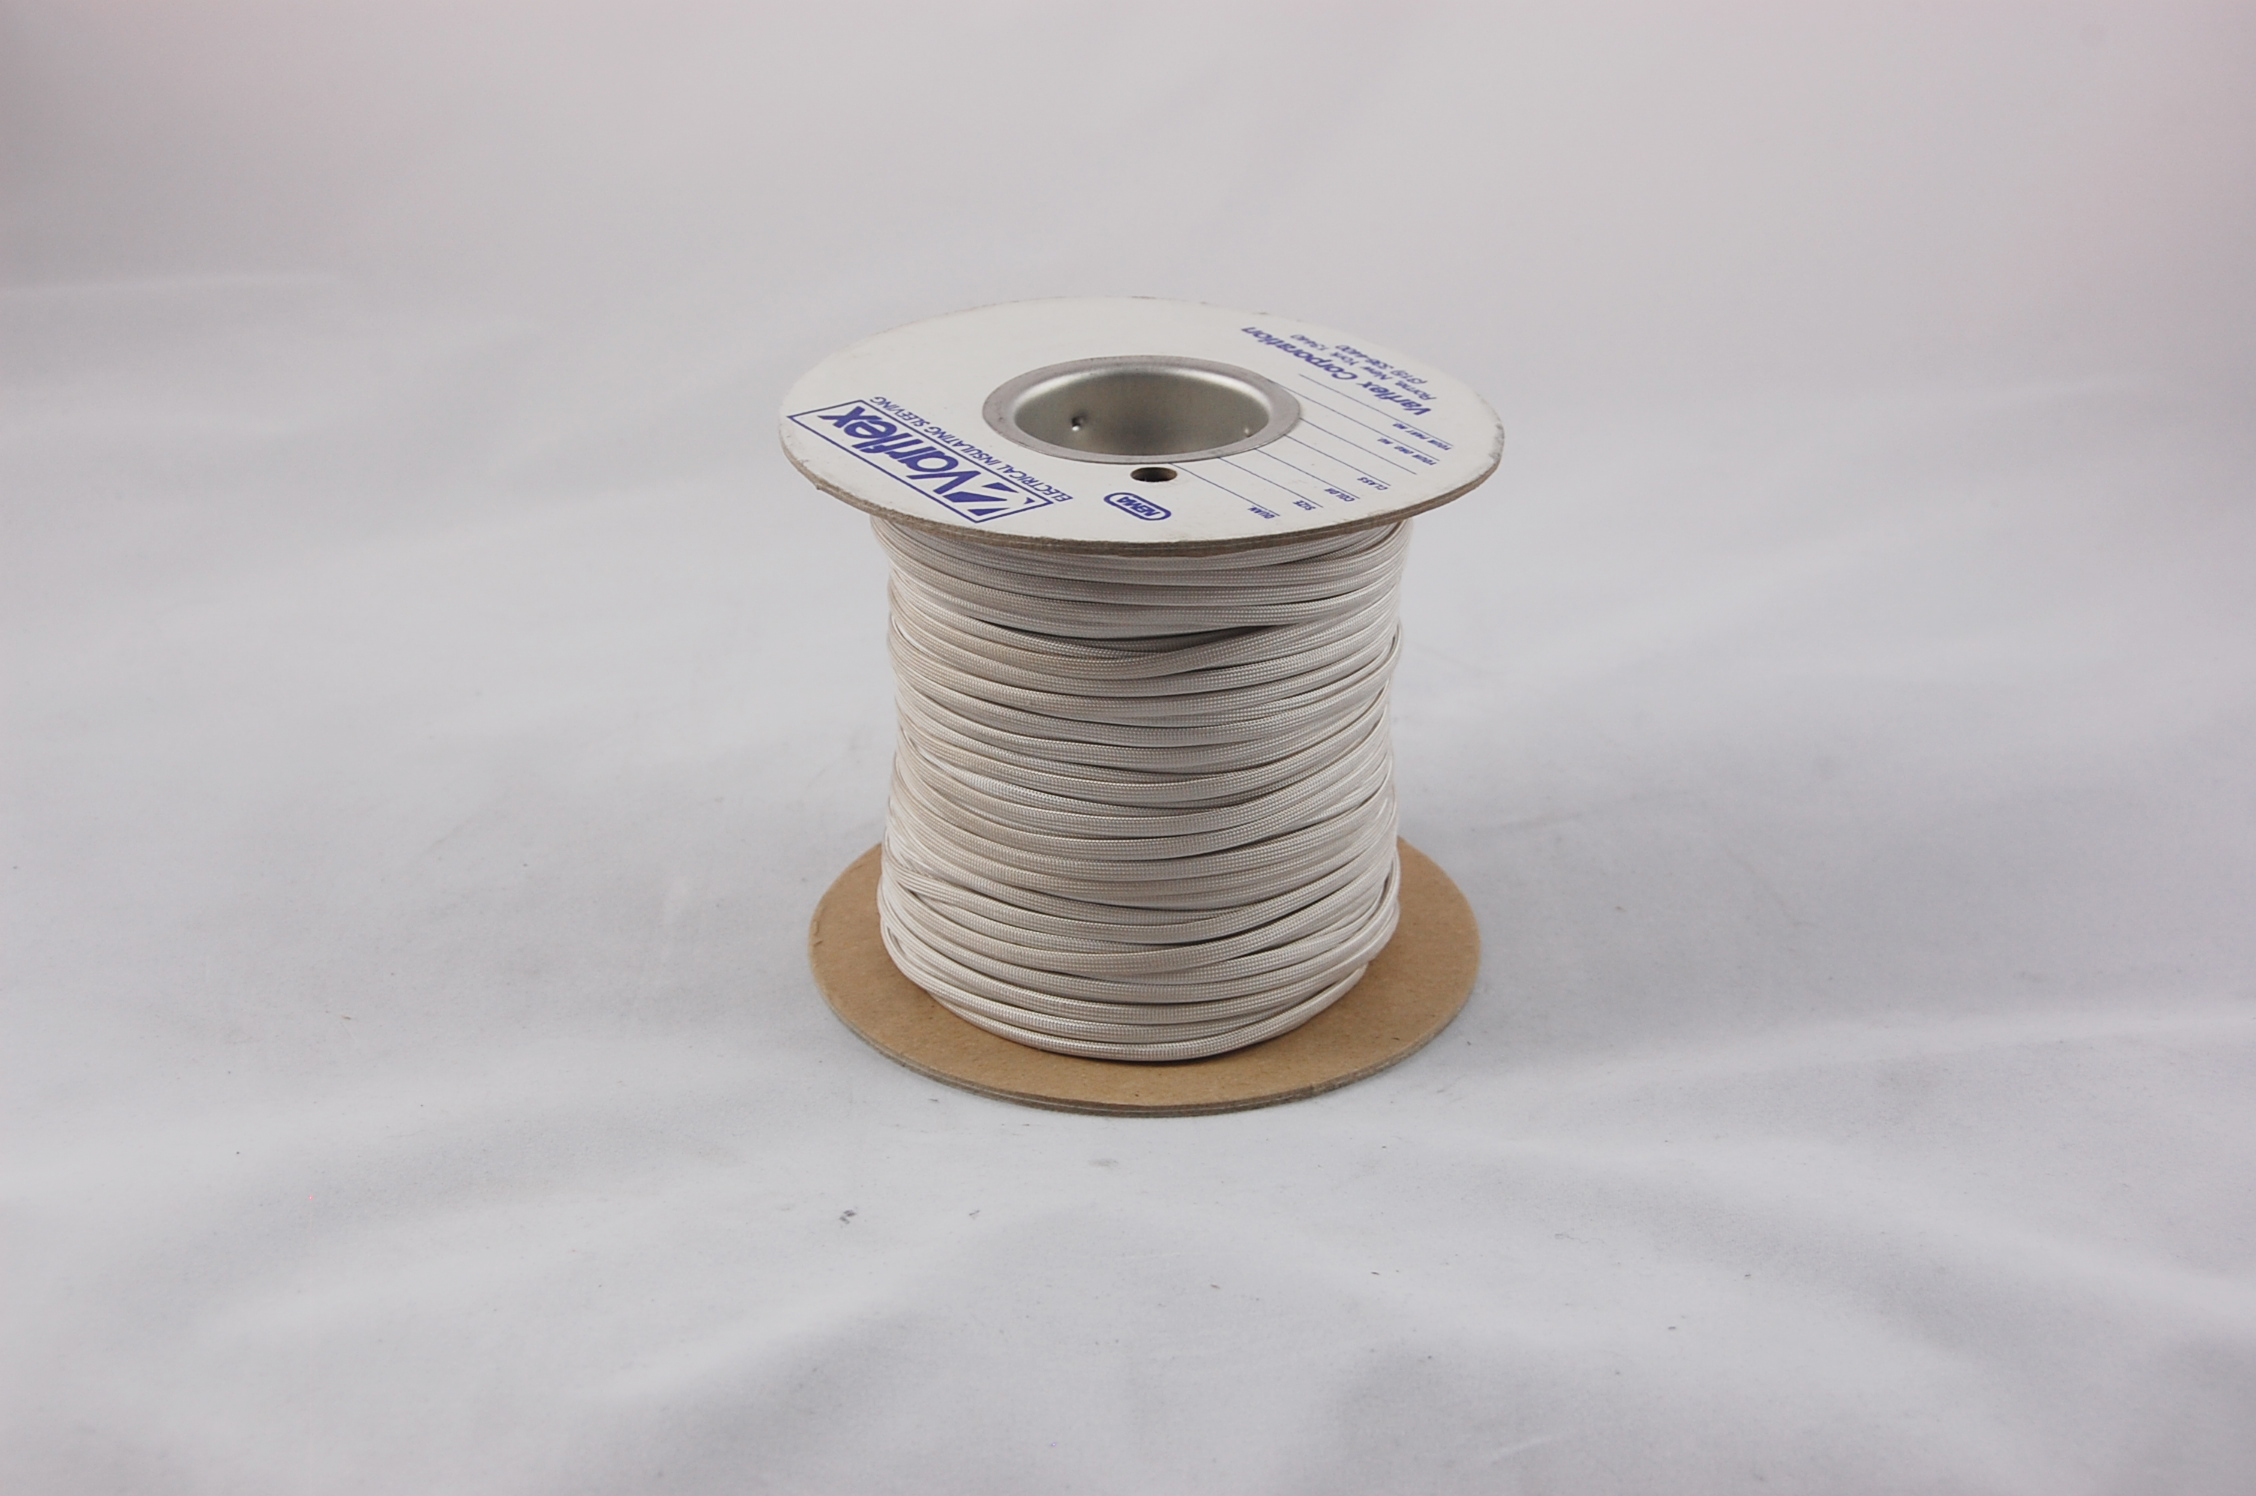 3/4" AWG Varglas Type H Heat-Cleaned High Temperature Non-Fray Flexible Fiberglass Sleeving , natural, 100 FT per spool